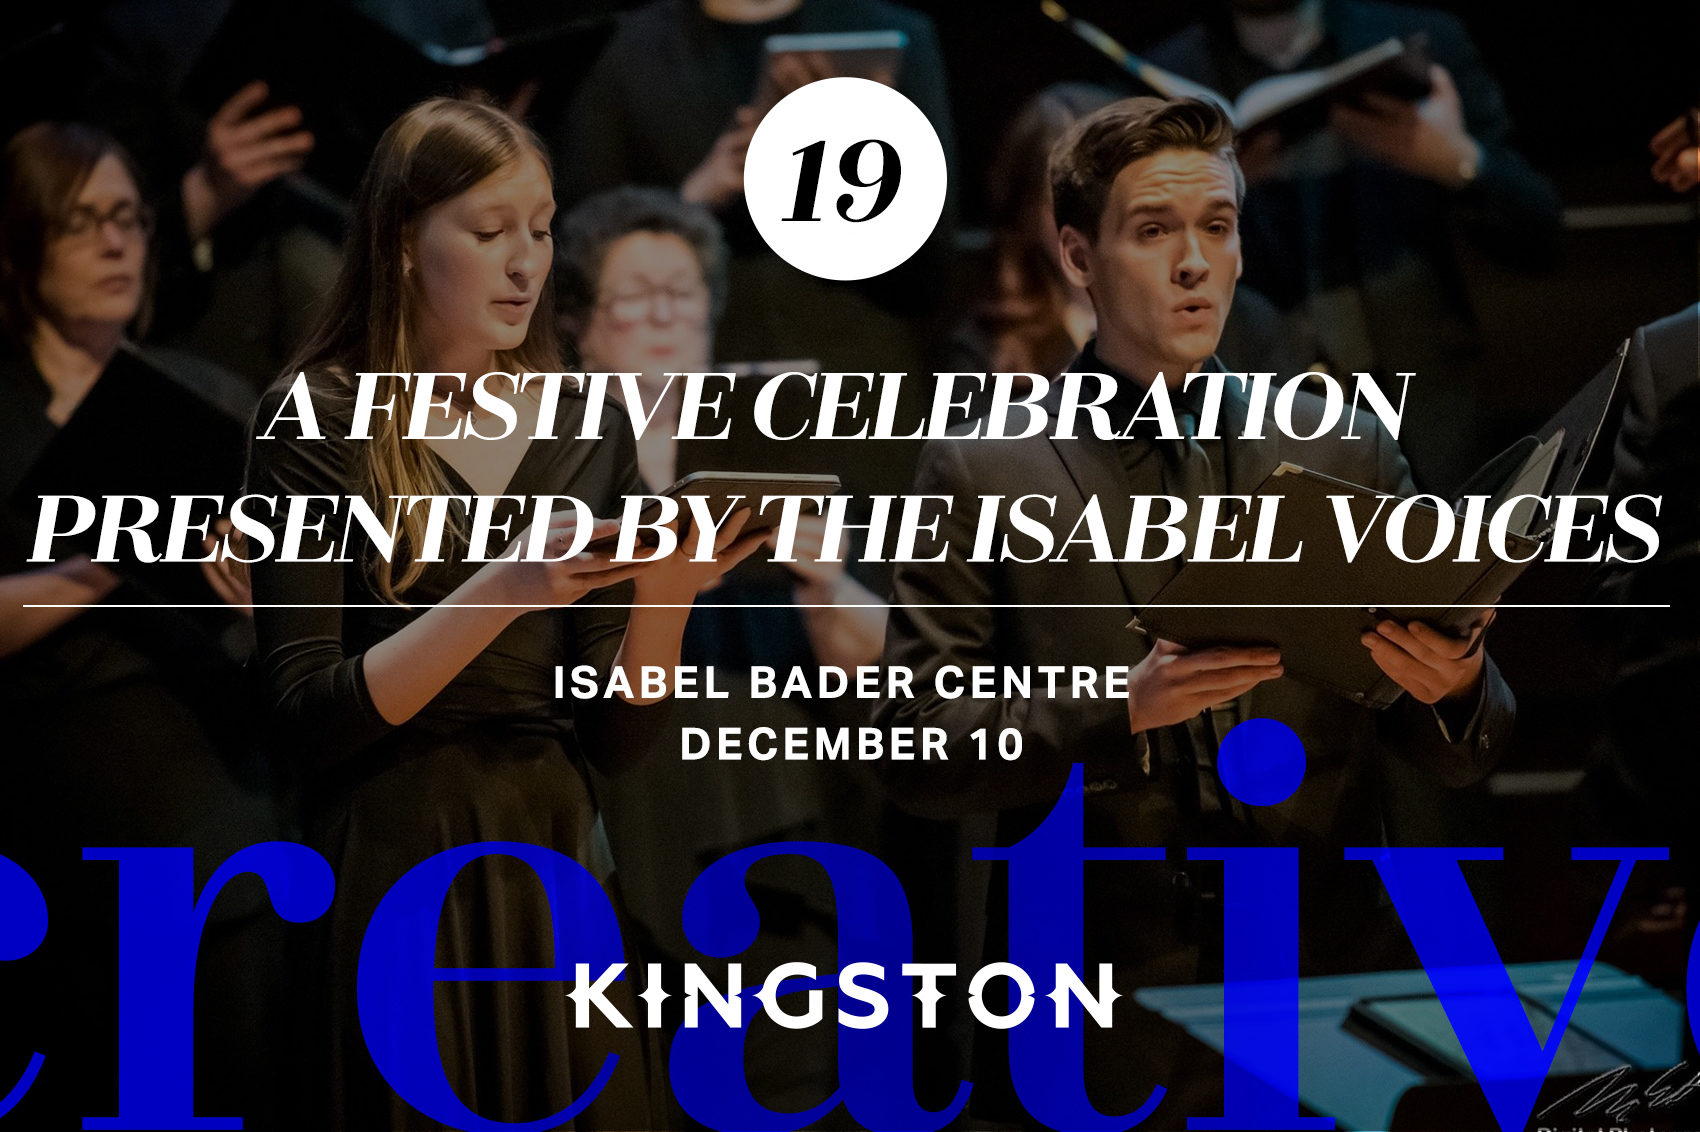 A festive celebration presented by the Isabel Voices